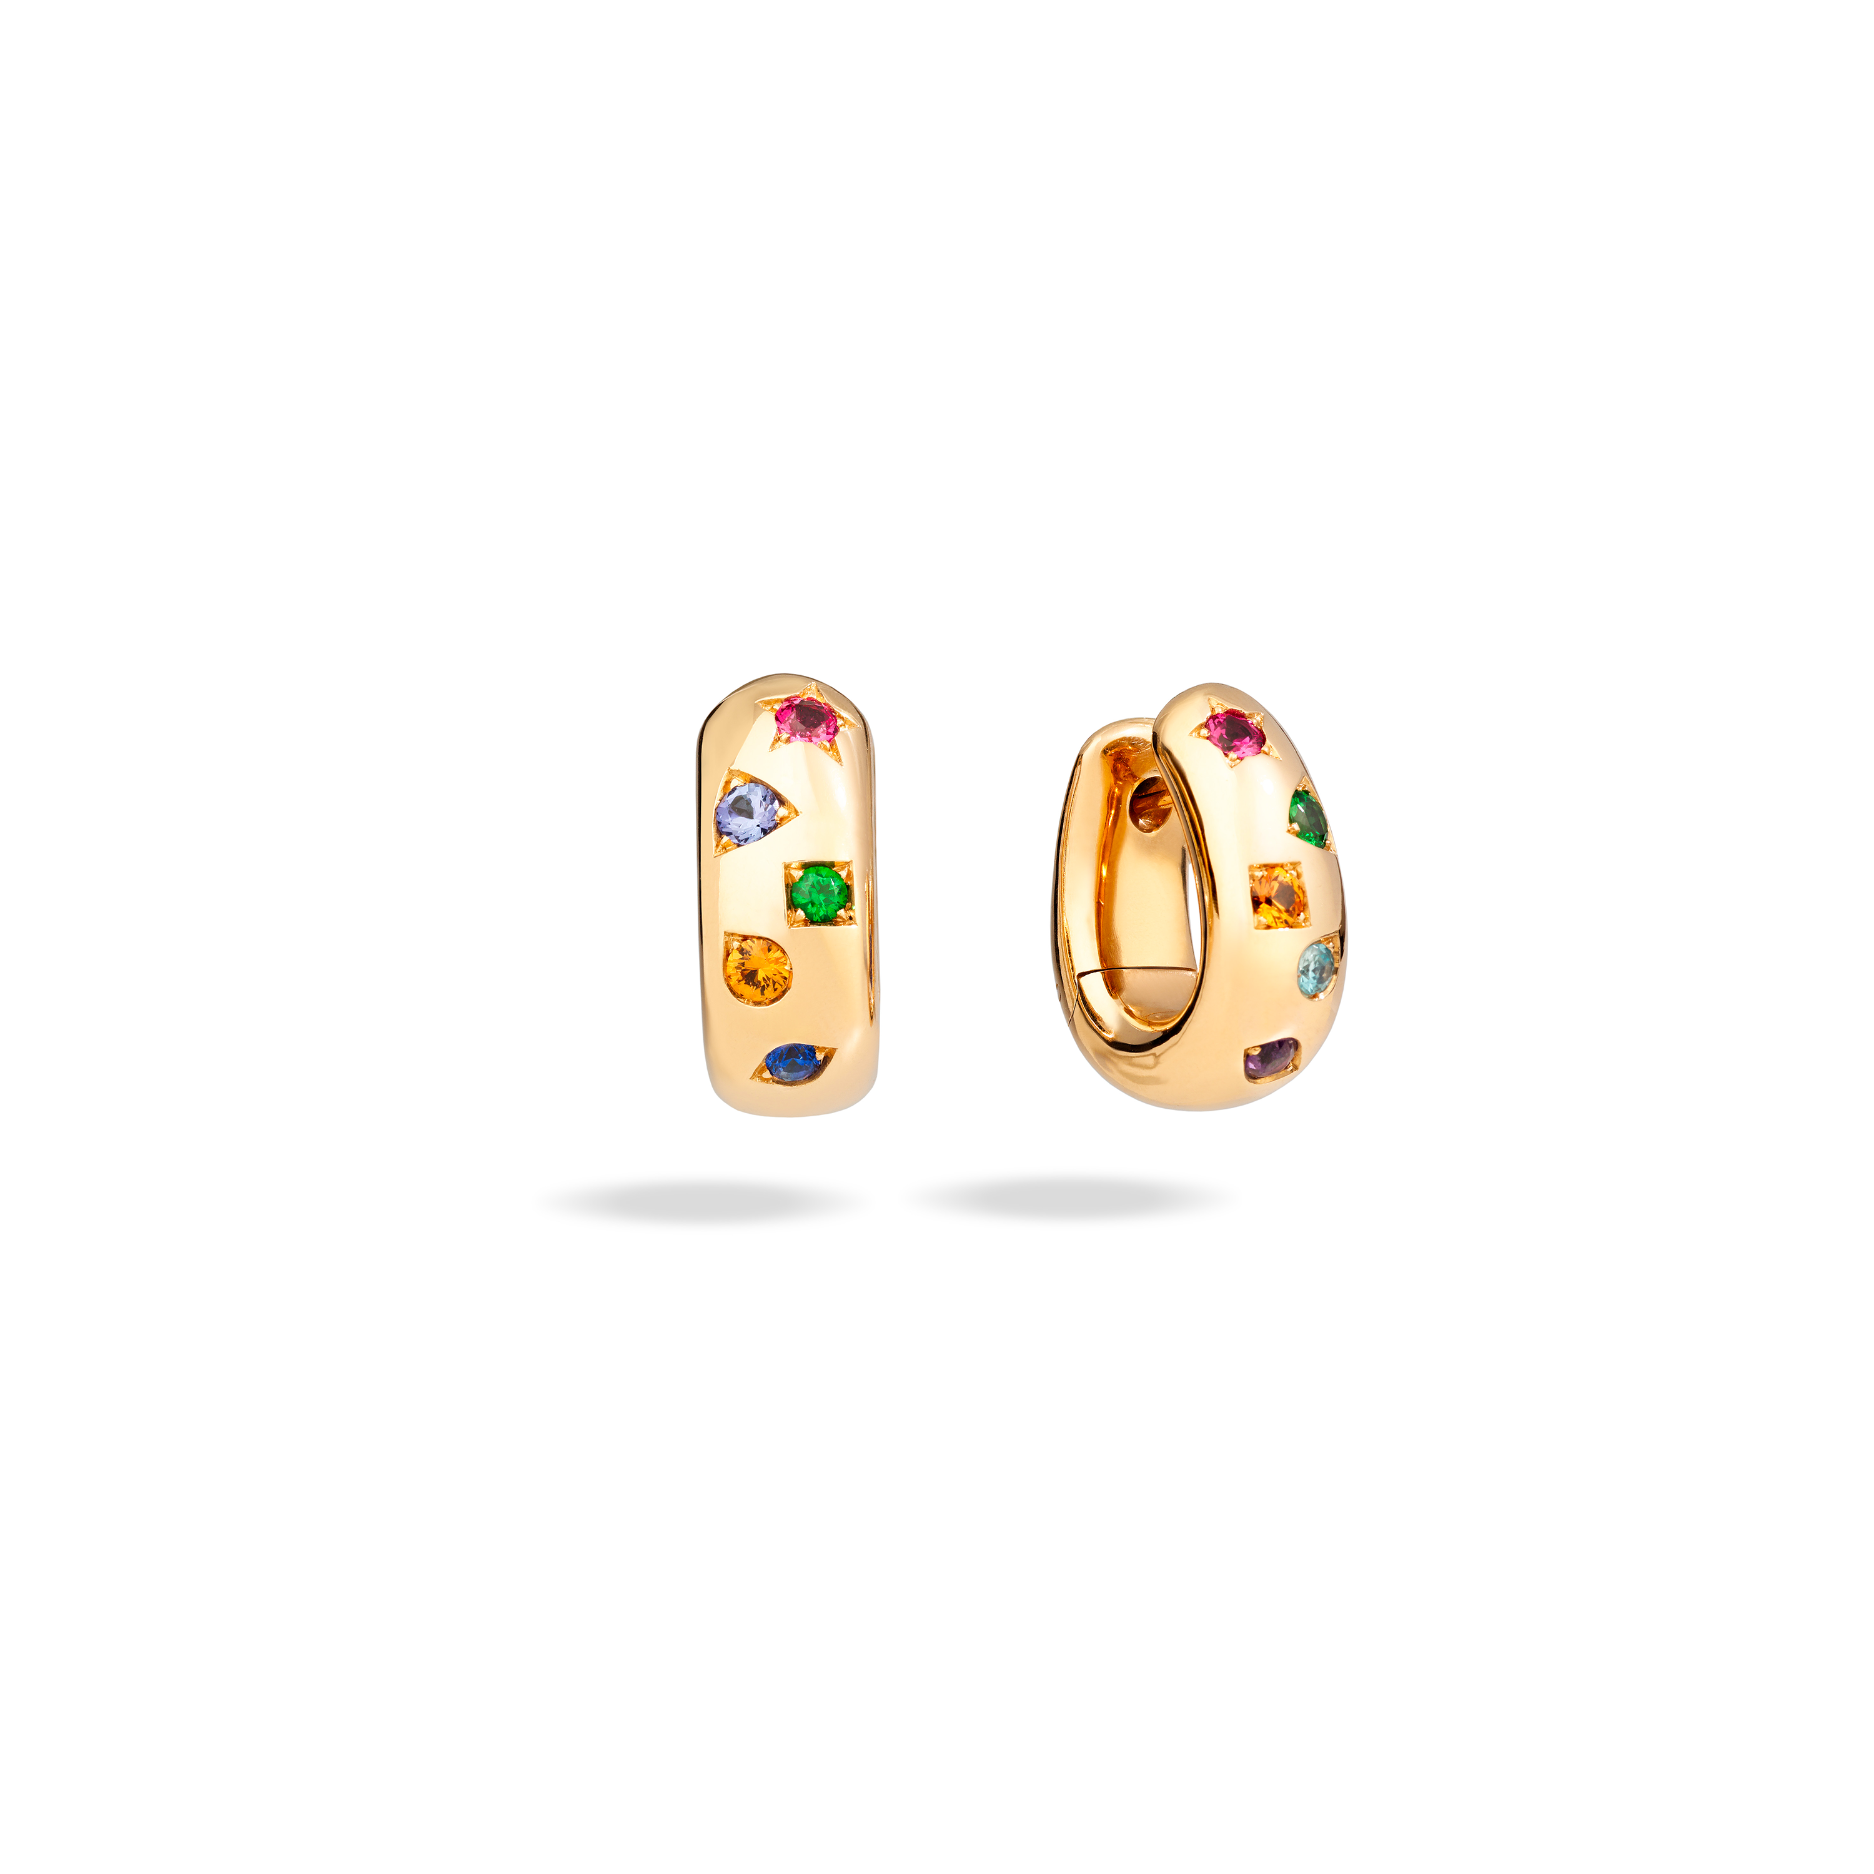 Pomellato Iconica Earrings in 18k Rose Gold with Coloured Gemstones - Orsini Jewellers NZ